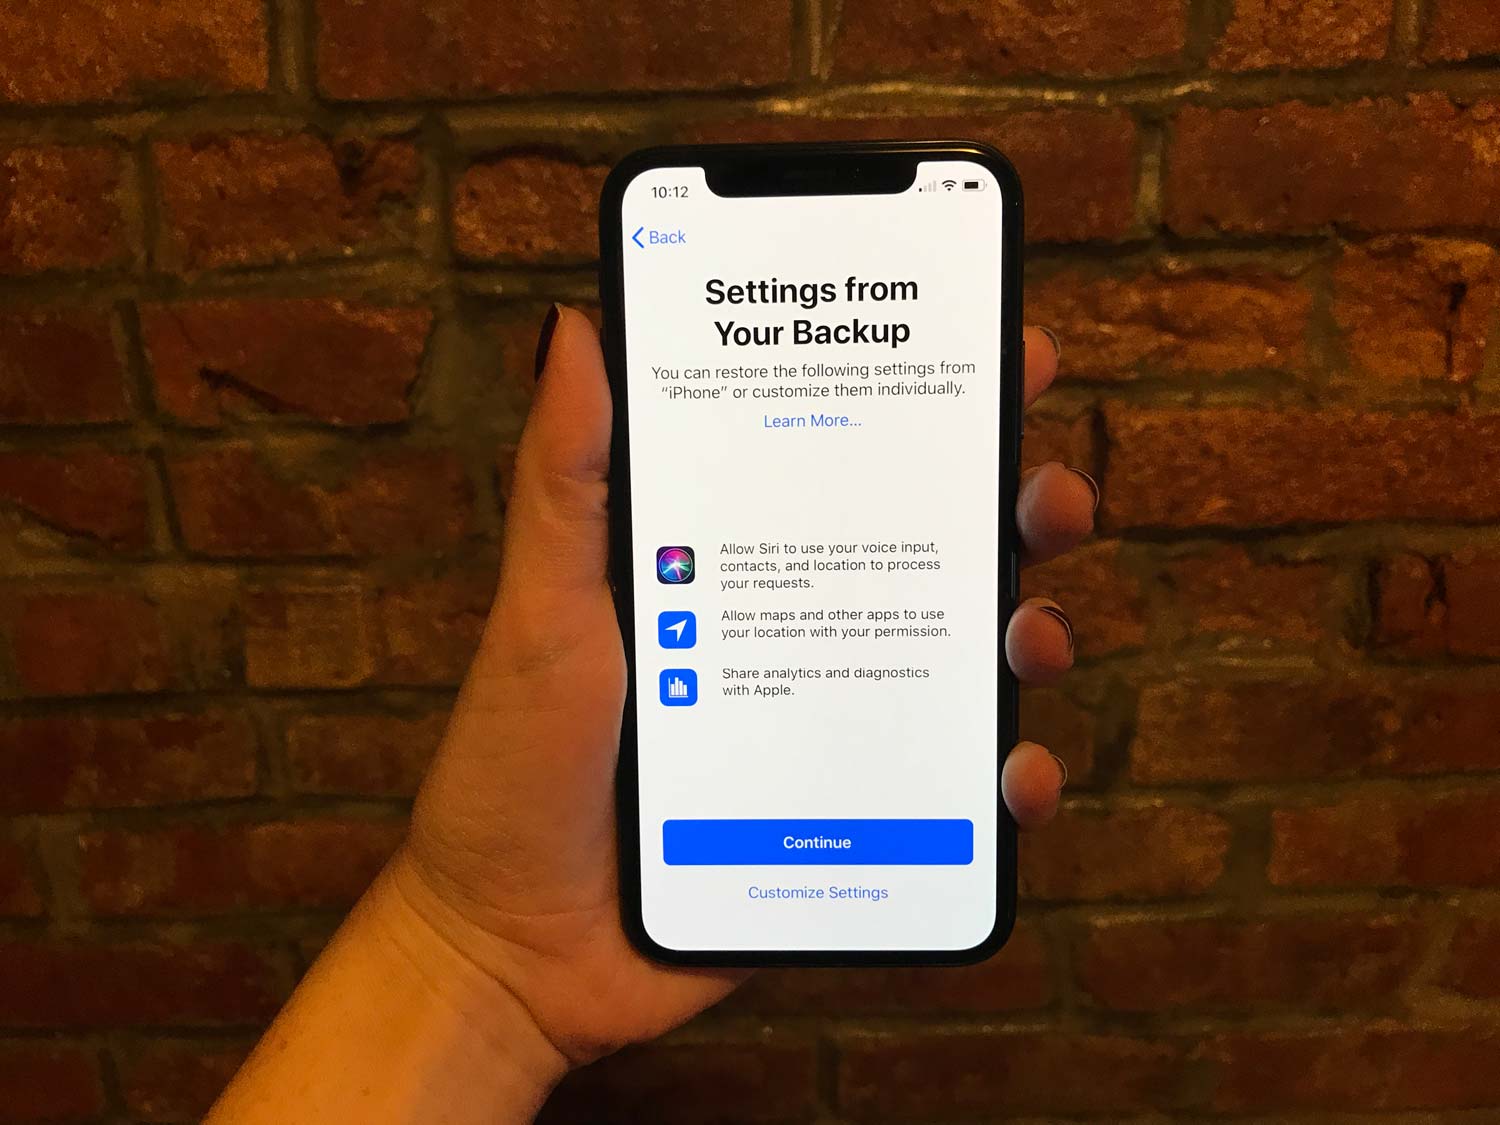 How to Use the iPhone XS, iPhone XS Max and iPhone XR | Tom's Guide